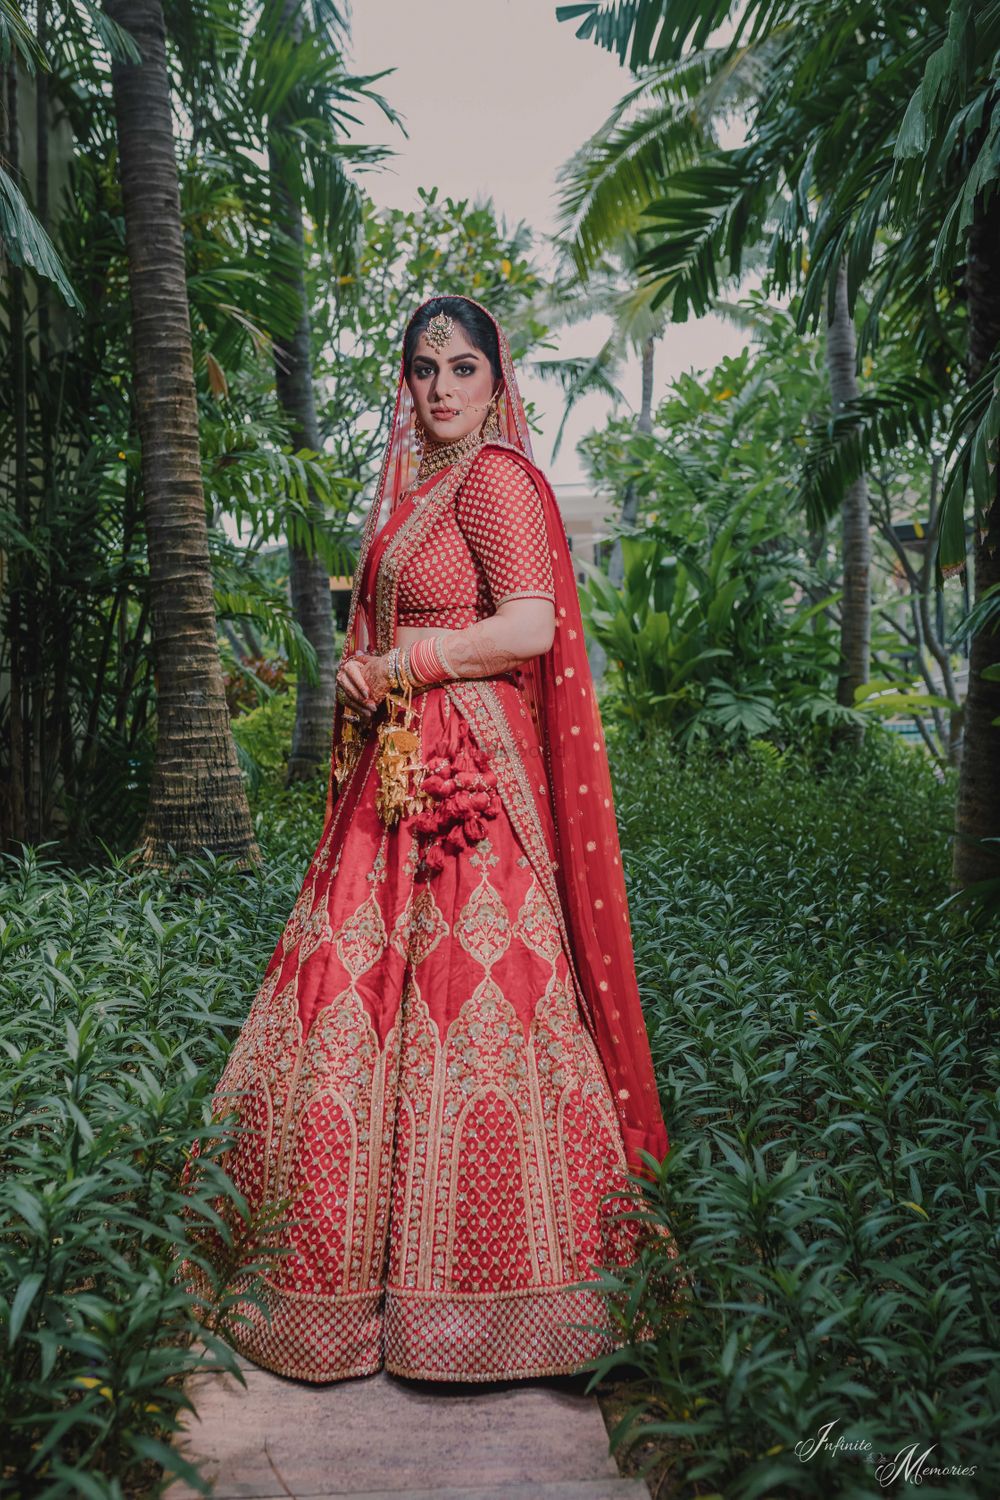 Photo of Bride in an embroidered red bridal lehenga